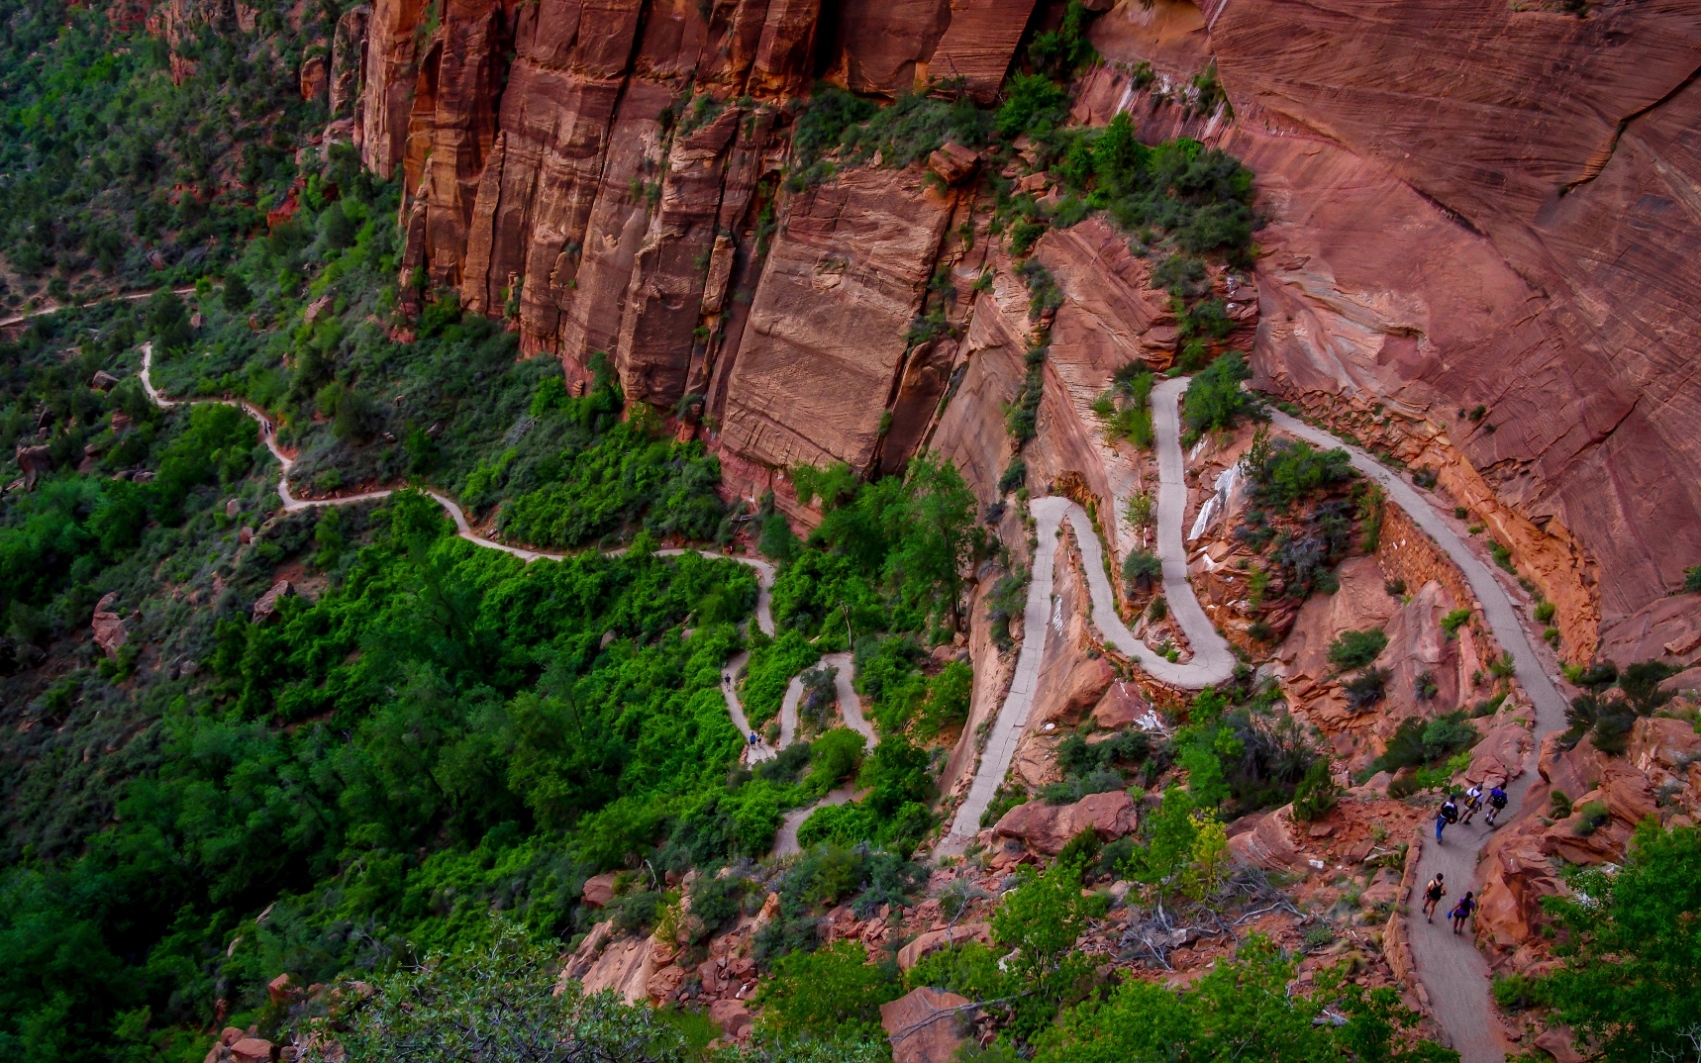 Switchbacks At Lower Part Of Trail To Angels Landing Again In Zion National Park, UT